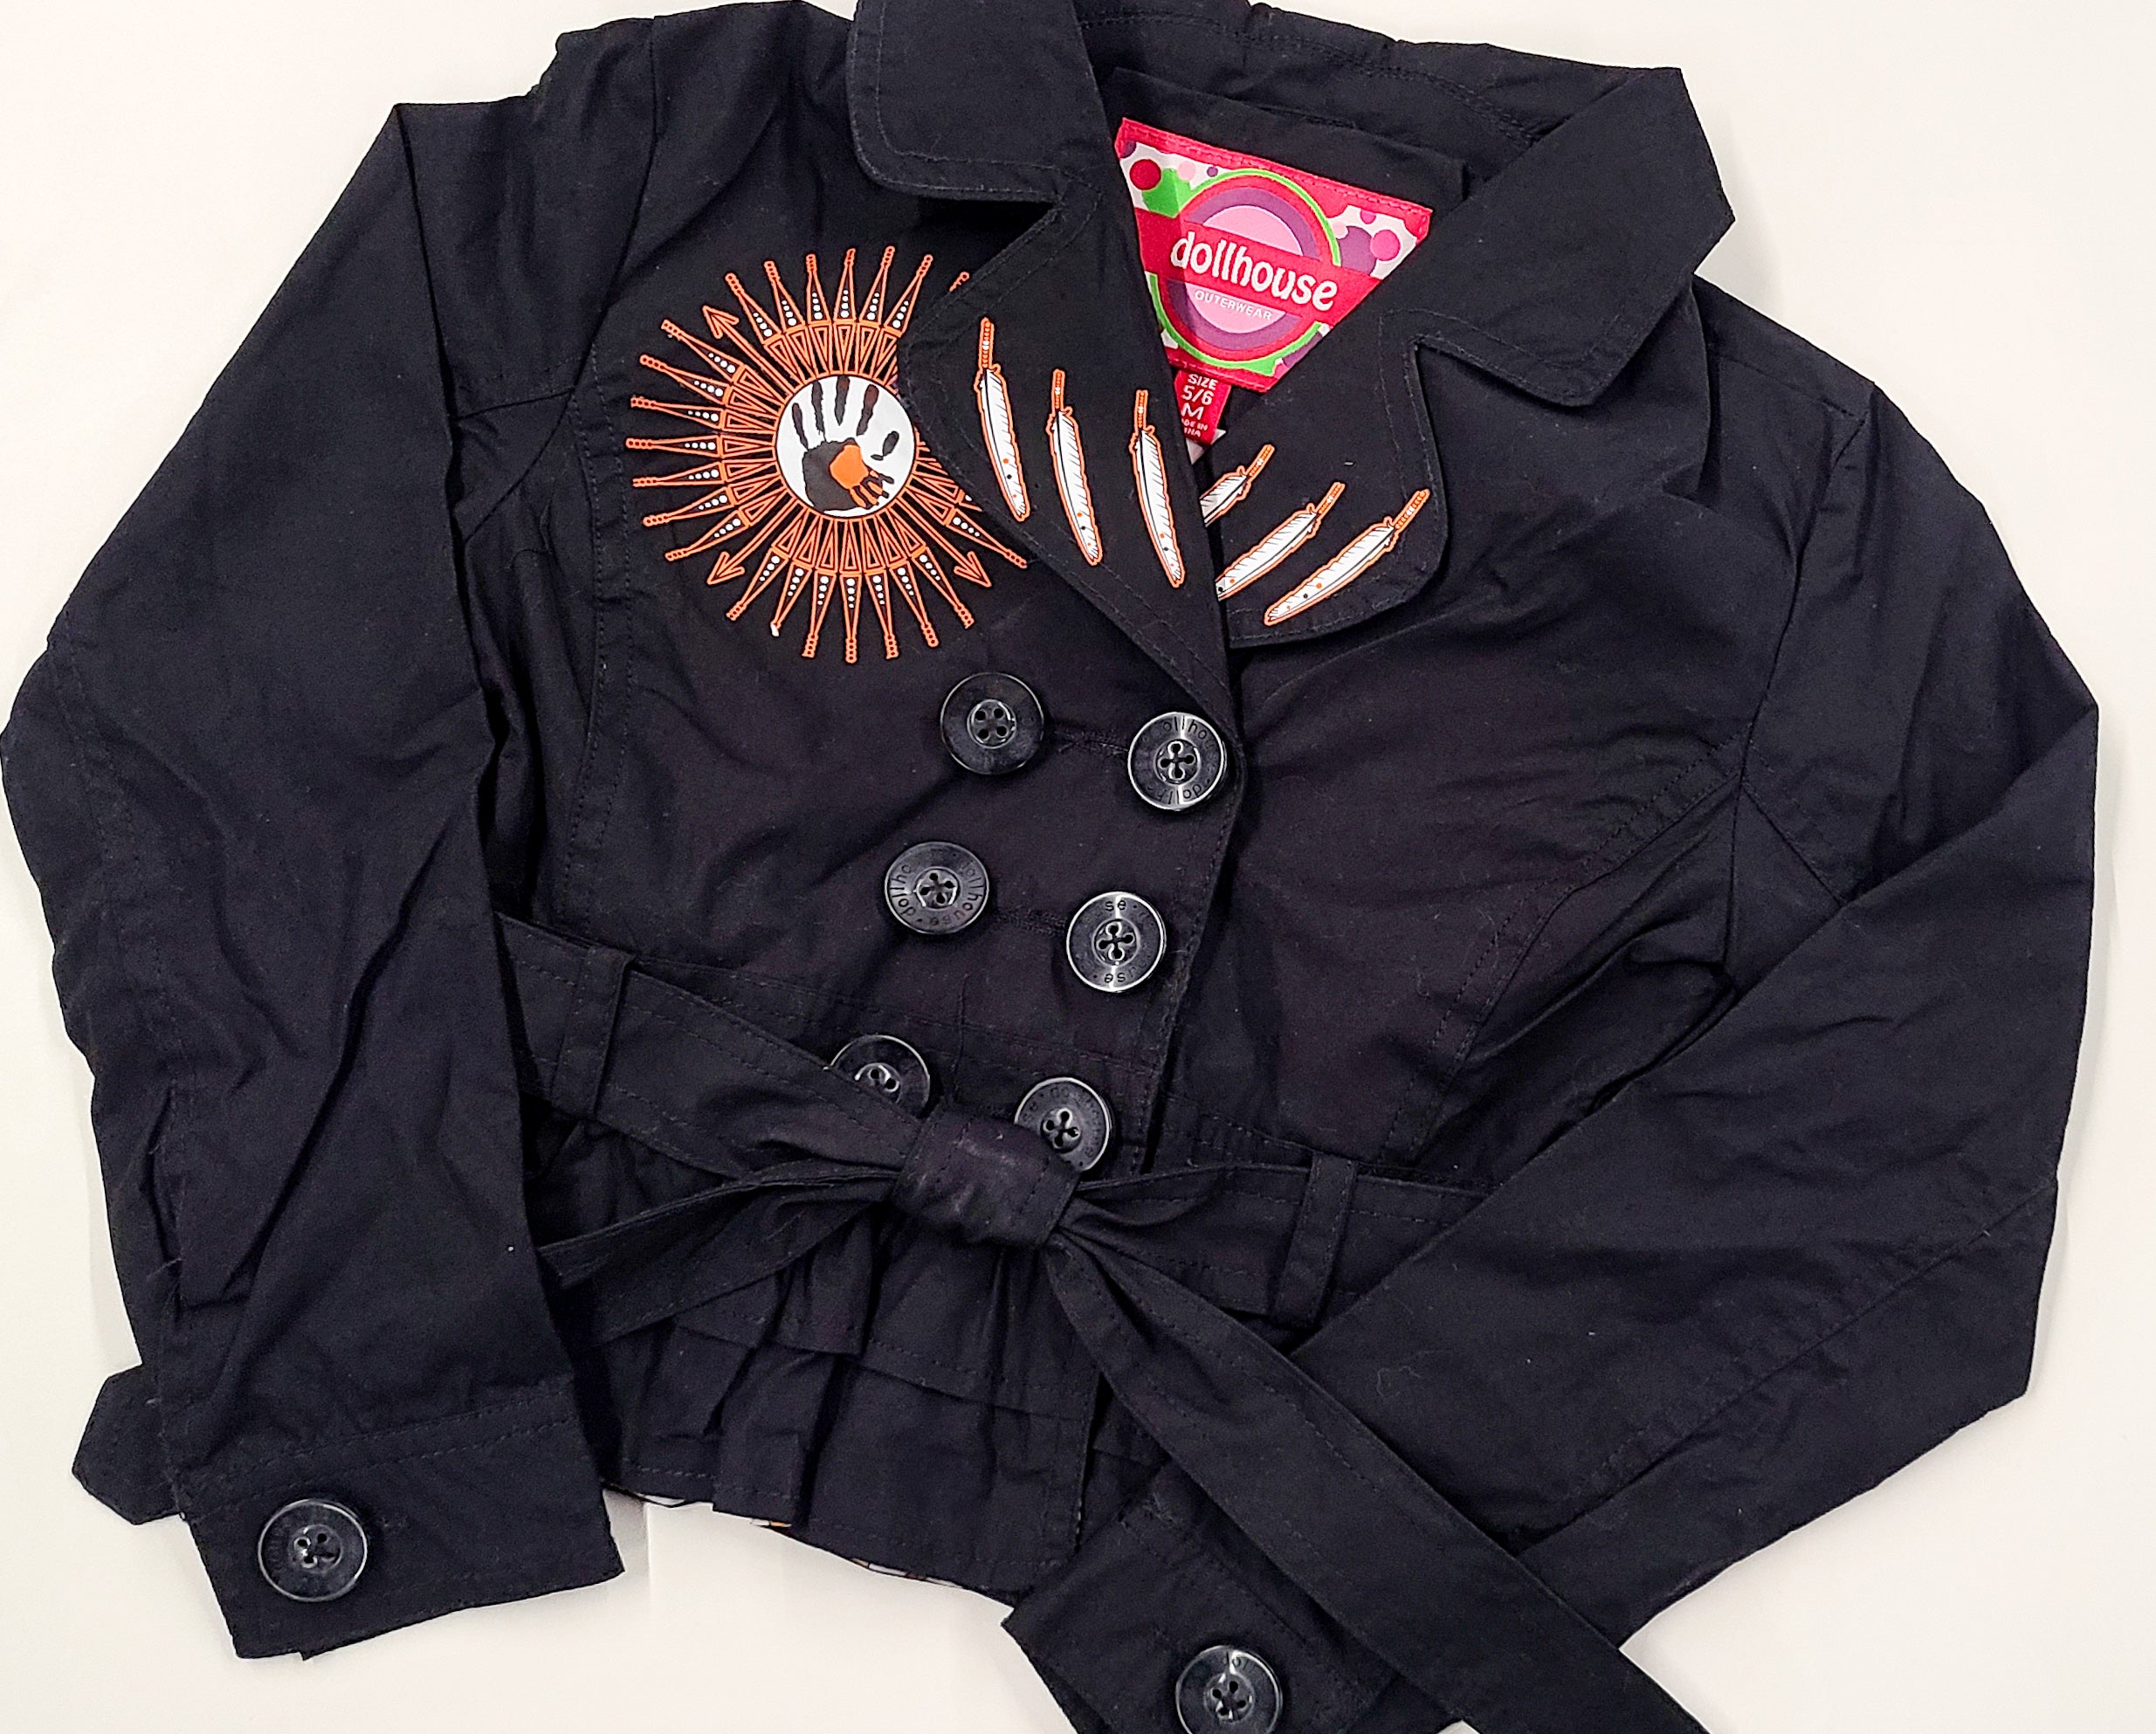 Children's Trench Coat with Transfer